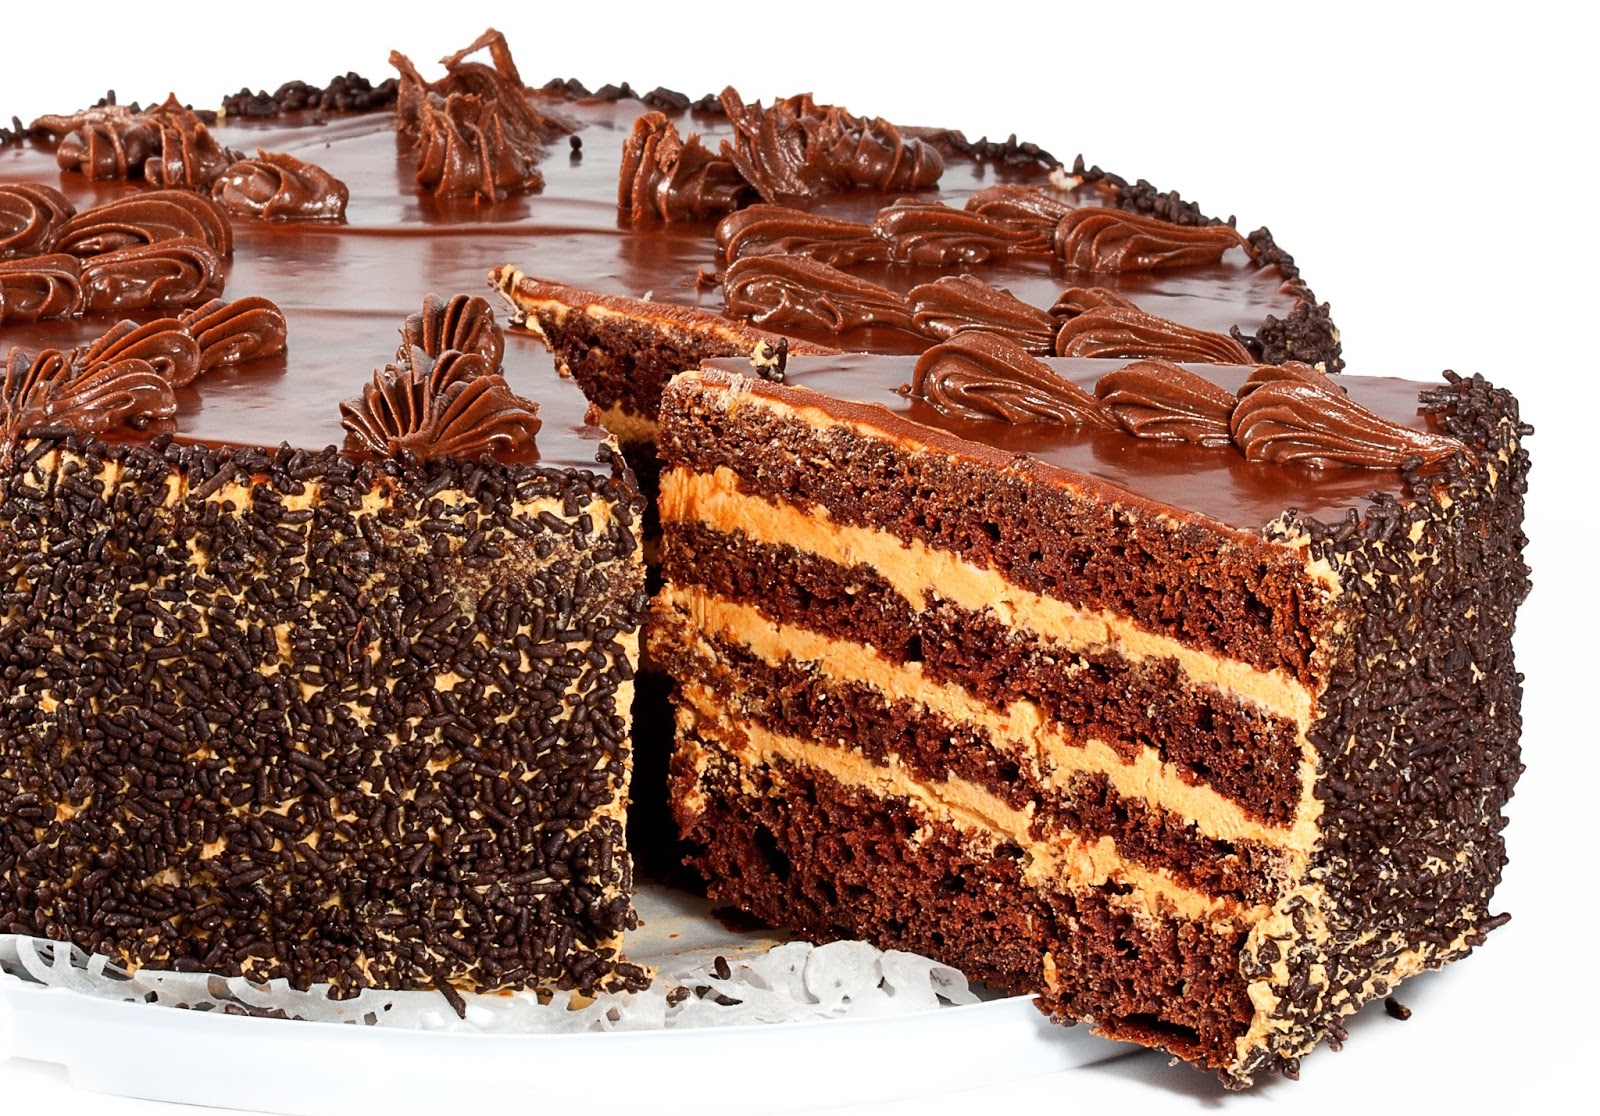 Beautiful Cake Wallpaper HD Images – HD Wallpapers Images ...